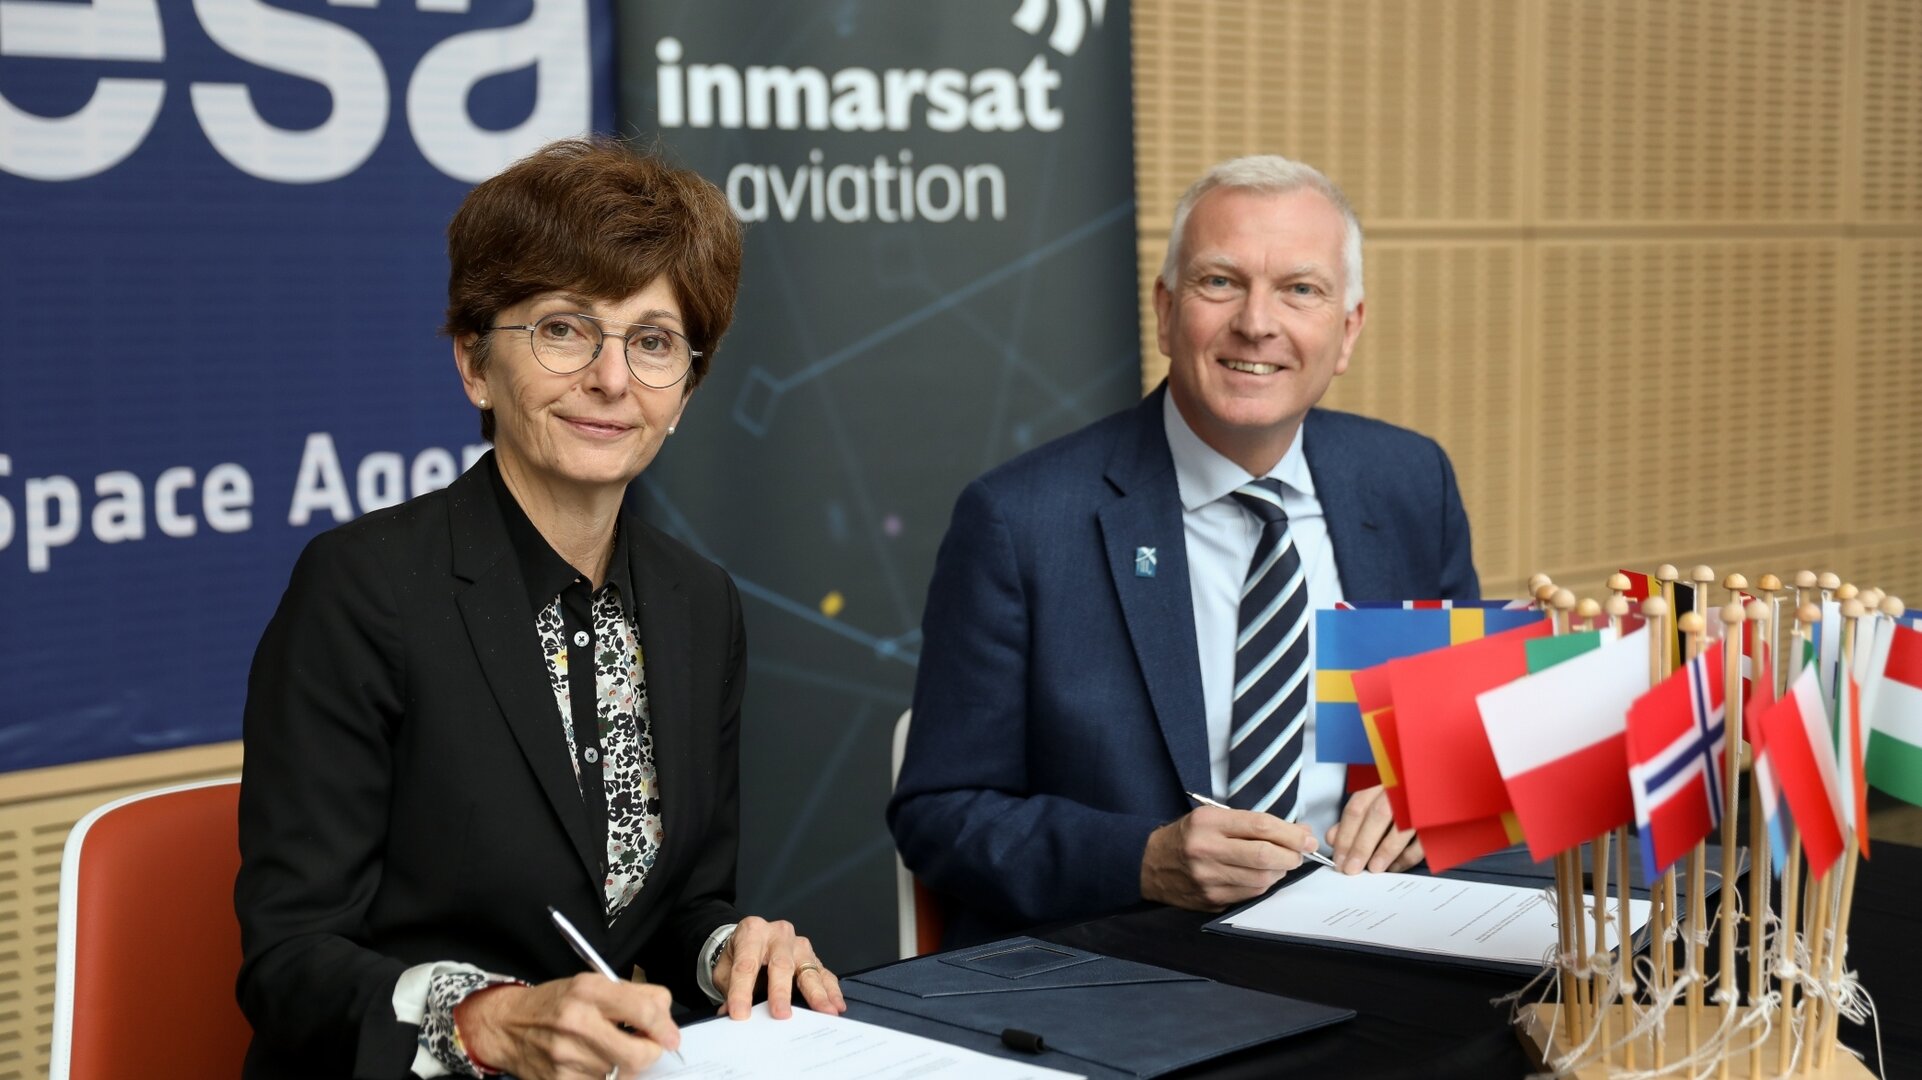 Magali Vaissiere, Director of Telecommunications and Integrated Applications at ESA, and Phil Balaam, President of Inmarsat Aviation